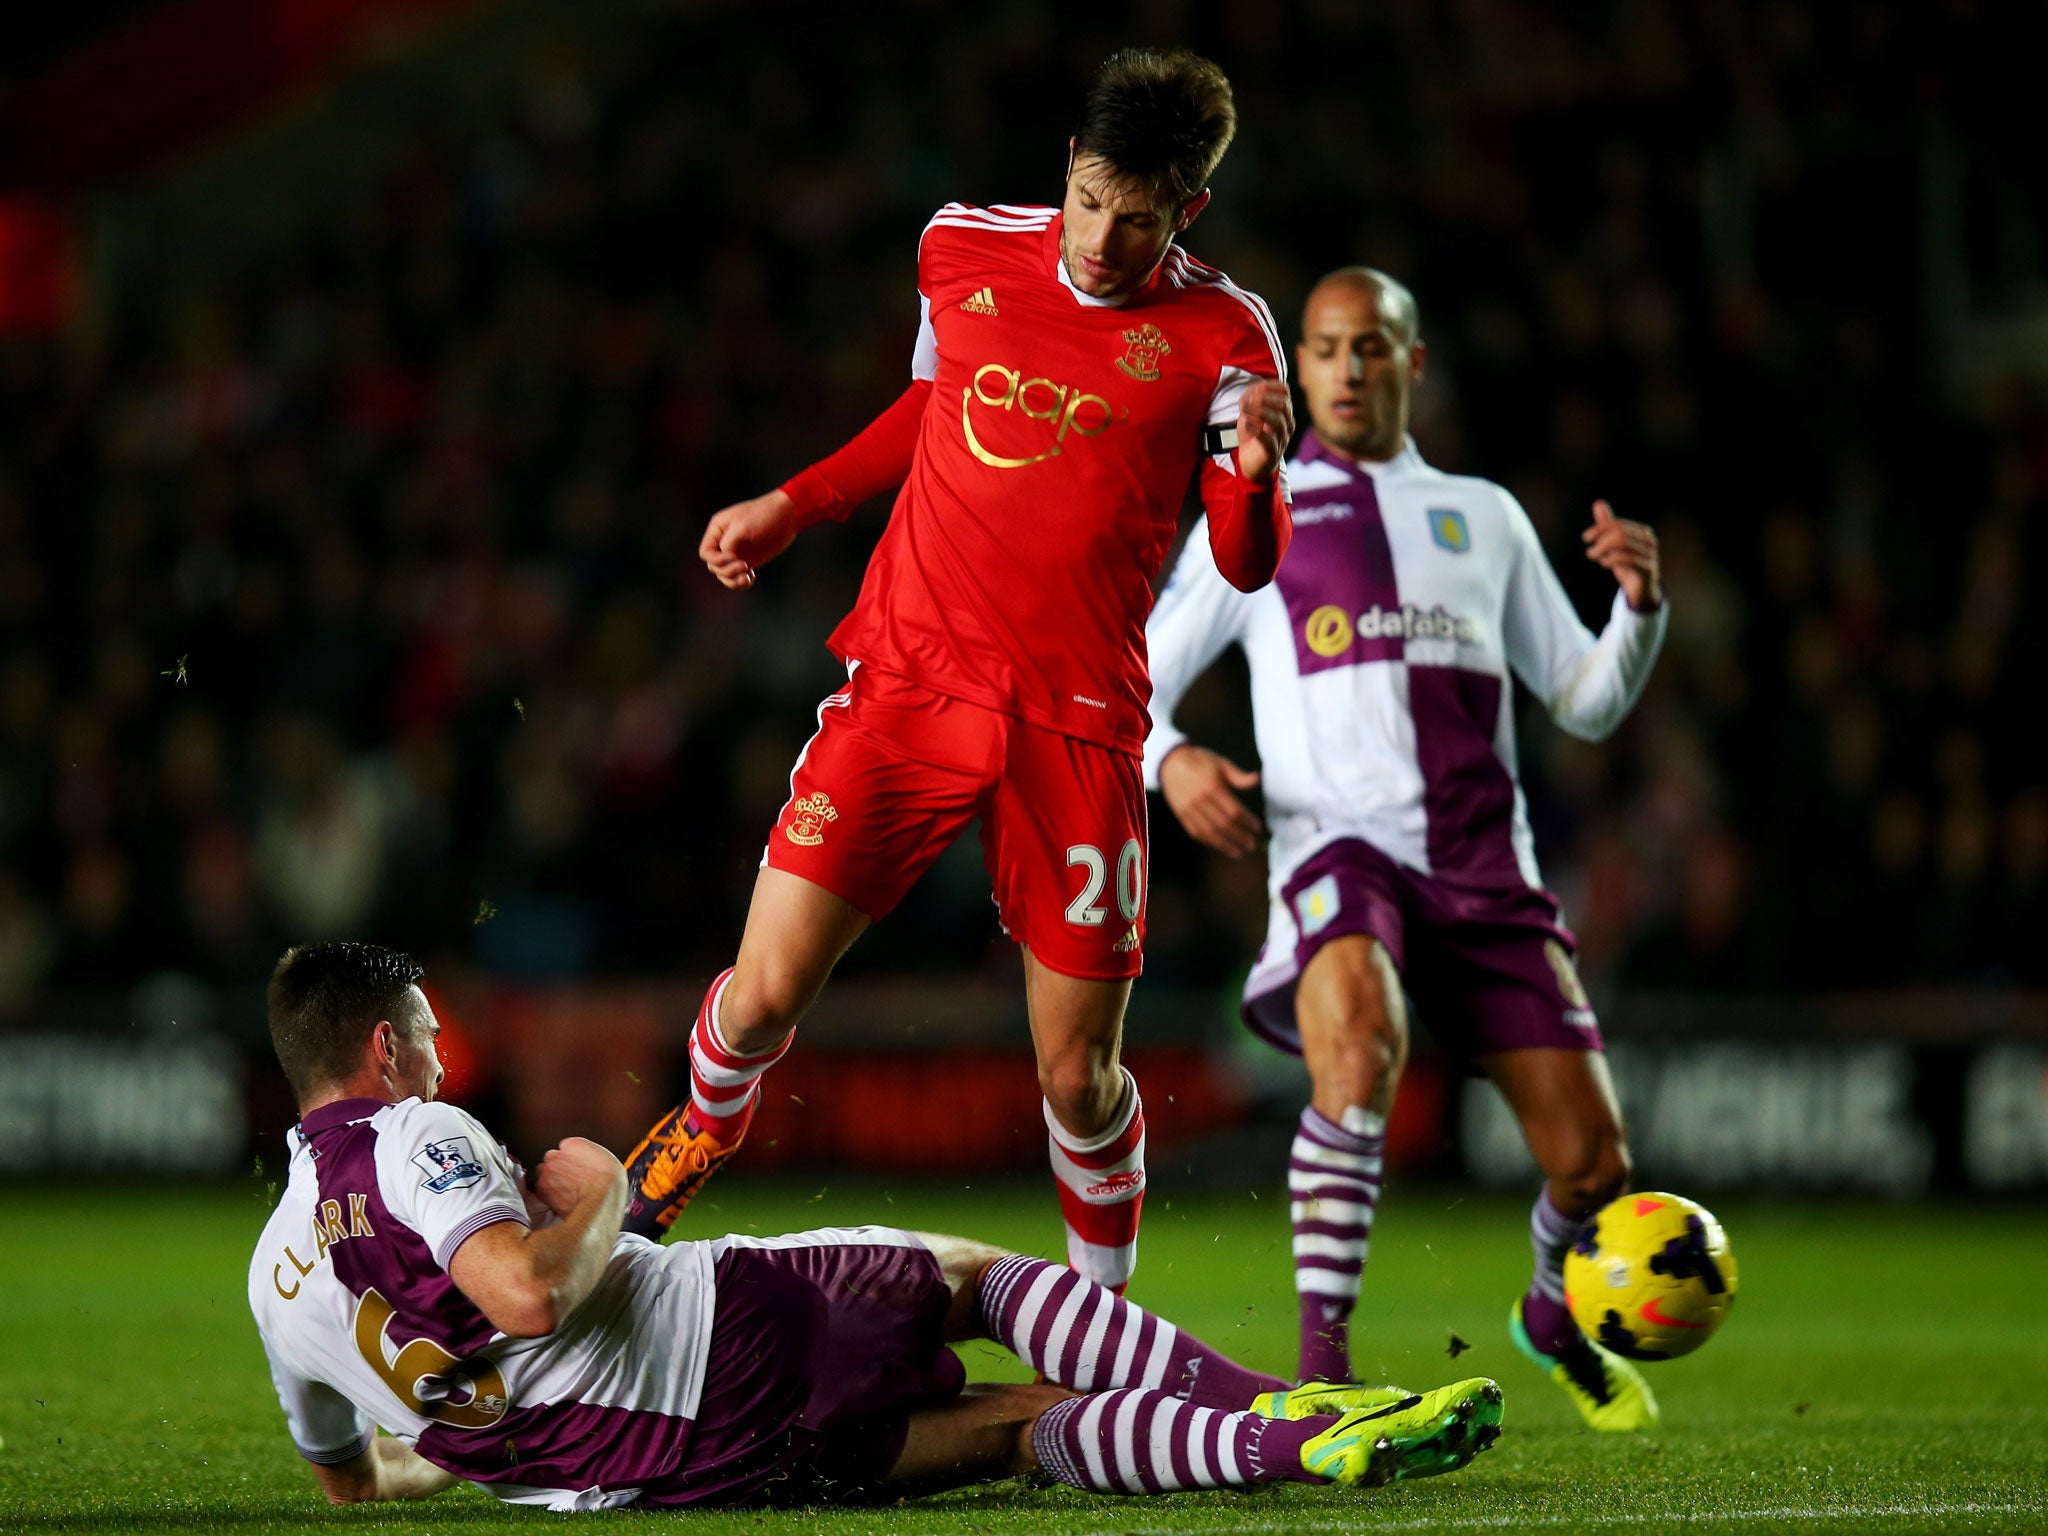 Adam Lallana could not explain how Southampton suffered defeat to Aston Villa